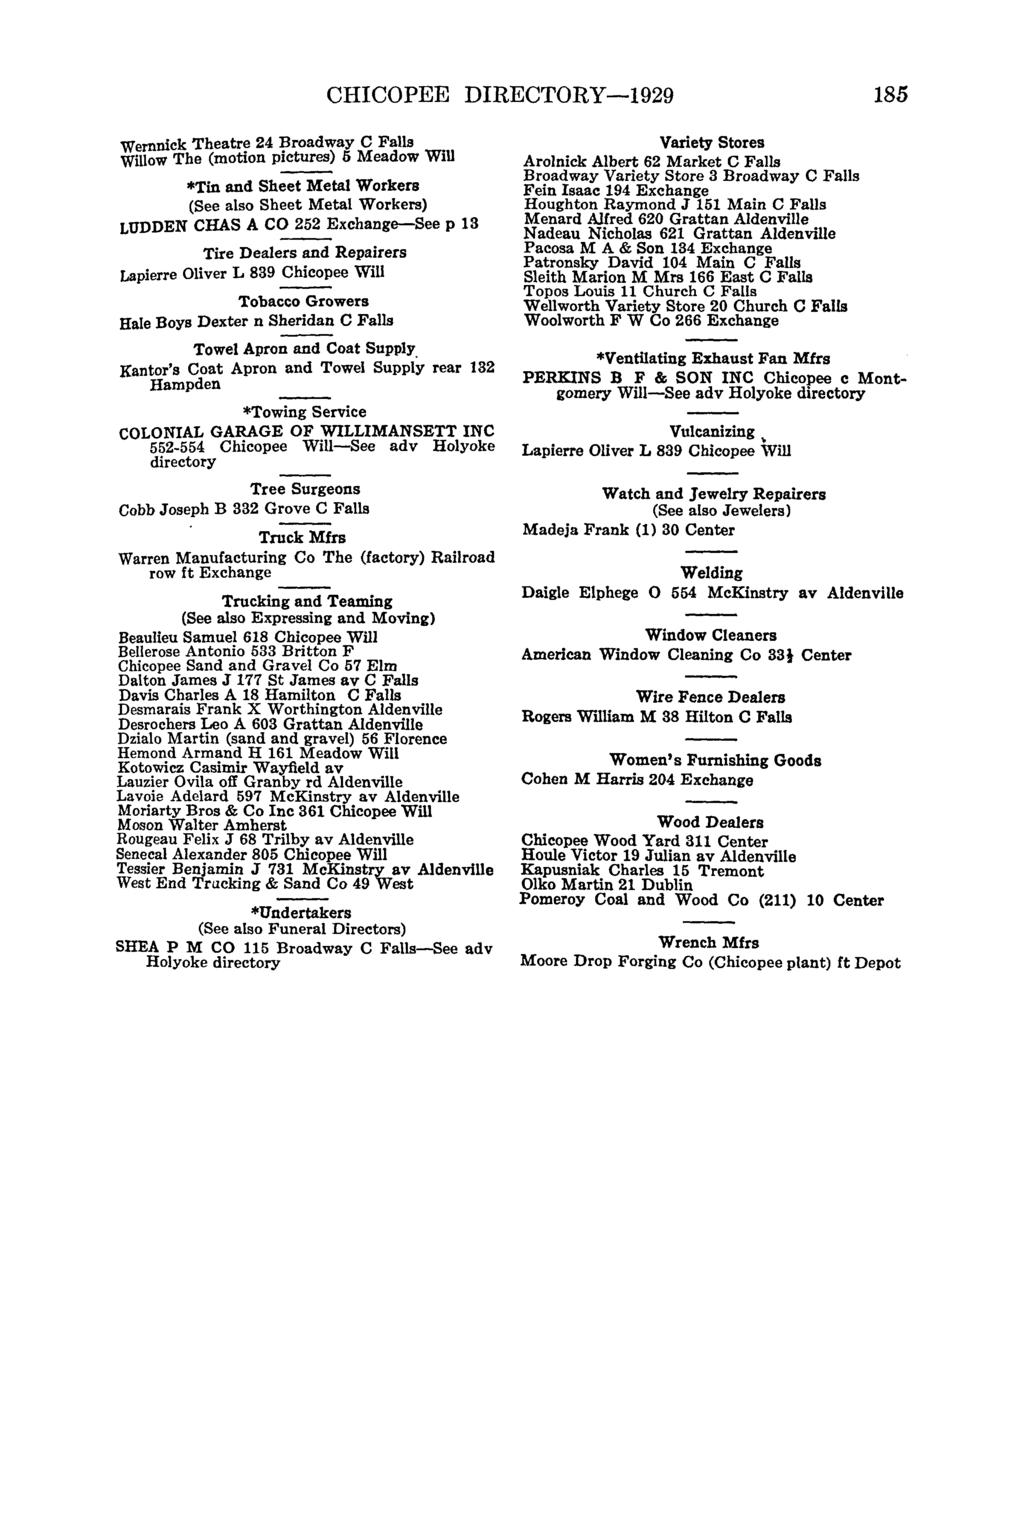 CHICOPEE DIRECTORY-1929 185 Wernnick Theatre 24 Broadway ow The (motion pictures) {) Meadow *Tin and Sheet Metal Workers (See also Sheet Metal Workers) LUDDEN CHAS A CO 252 Exchange-See p 13 Tire